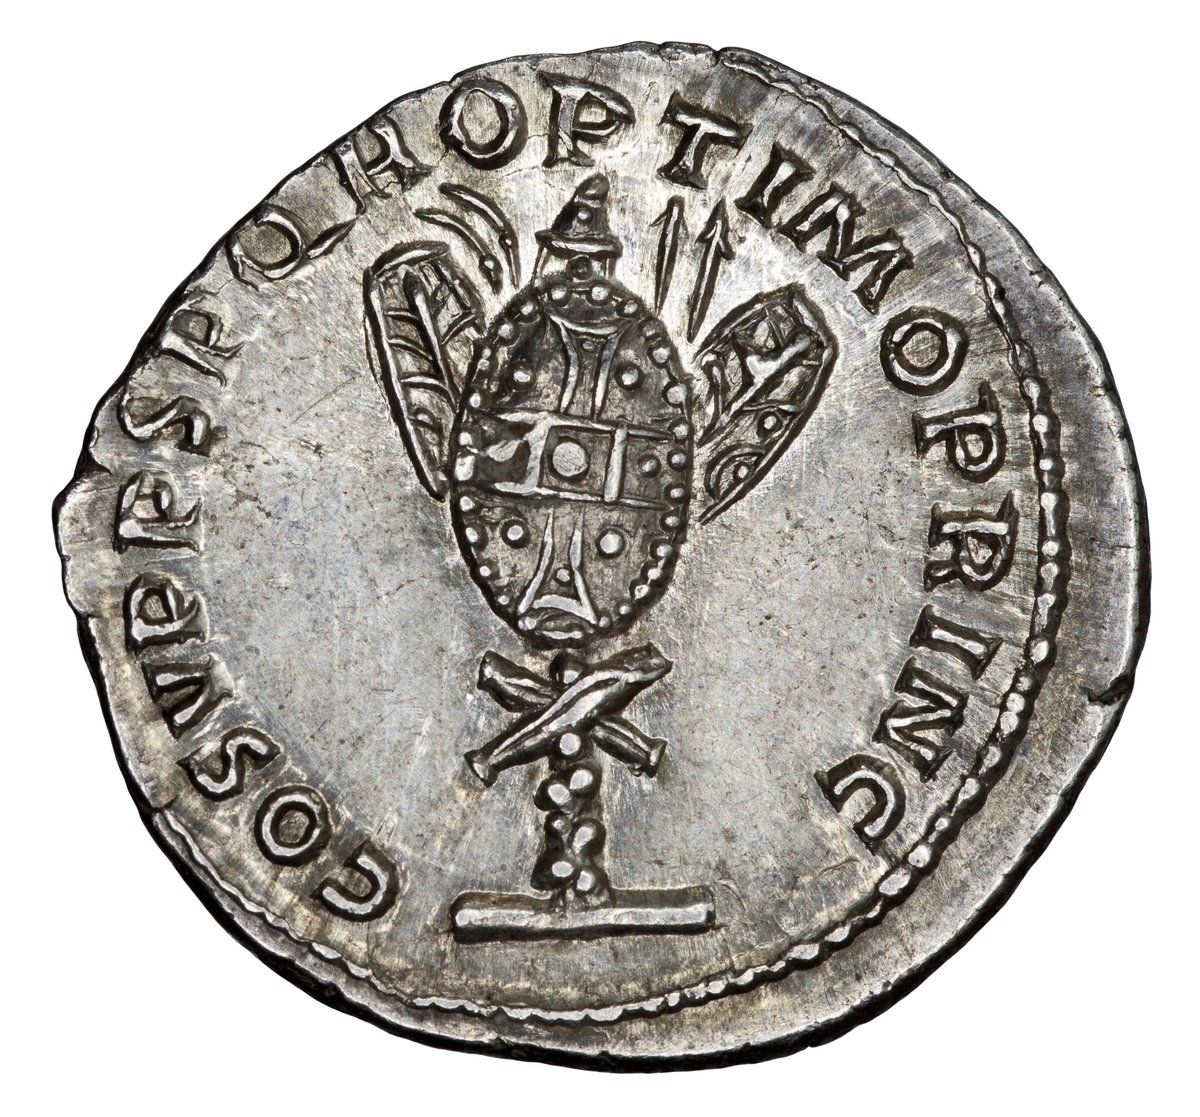 The trophy on this denarius is instead mainly constructed of highly decorated Dacian shields; one large, round shield at centre with hexagonal ones either side. Behind we see javelins and the distinctive curved Dacian falx. Atop is a helmet and below, a pair of crossed greaves.